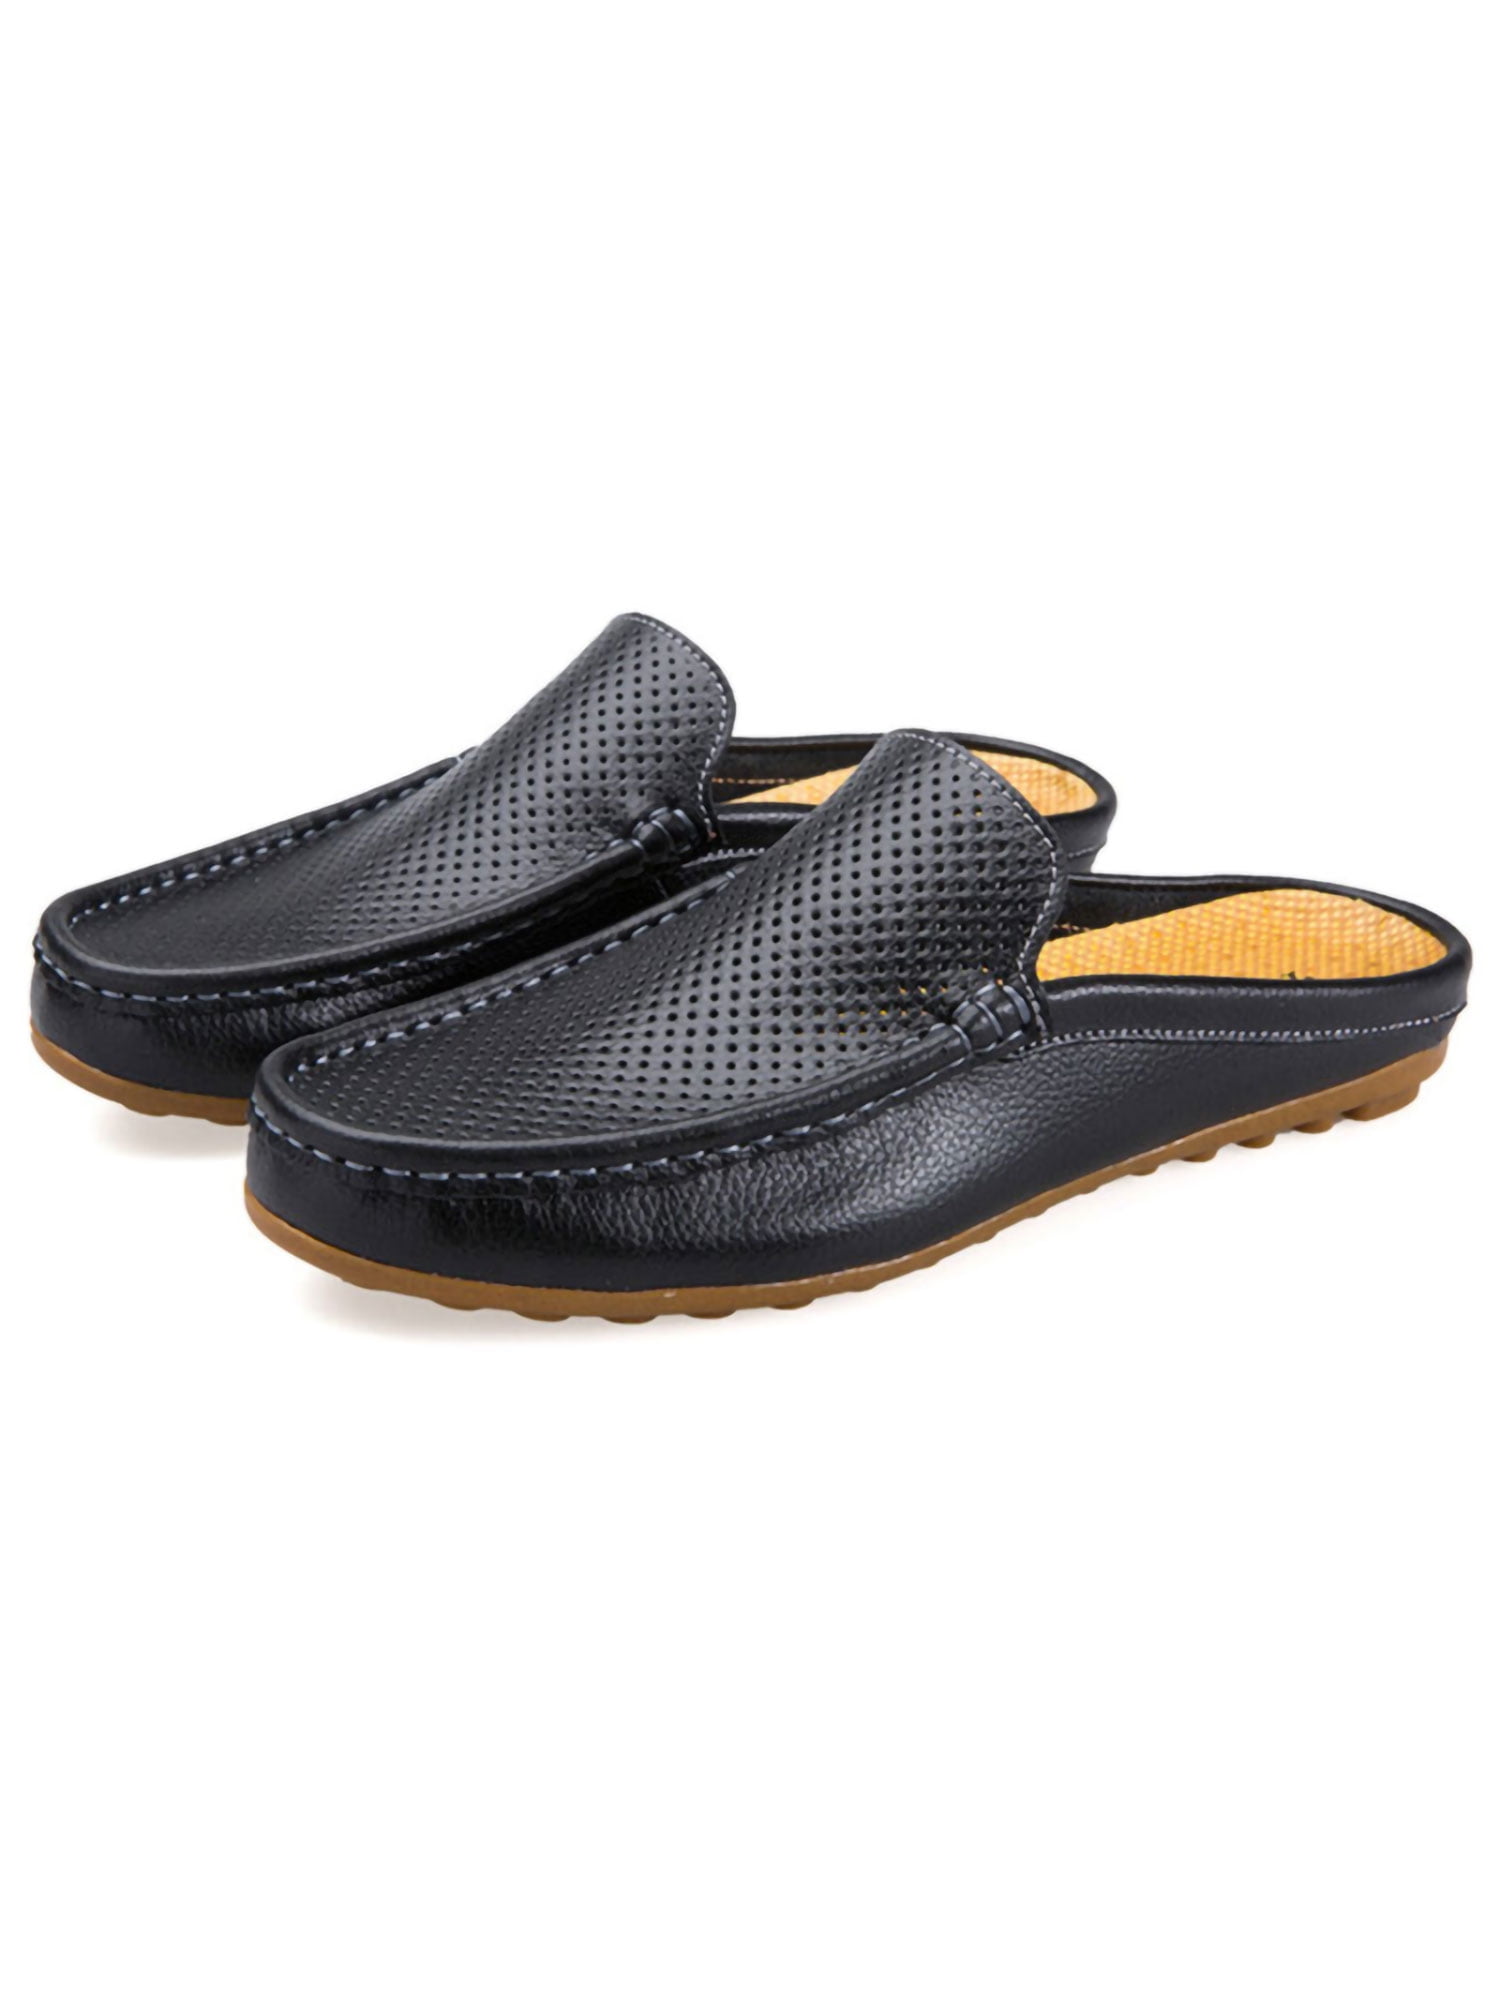 Agnona Leather Mules & Clogs in Black for Men Mens Shoes Slip-on shoes Slippers 